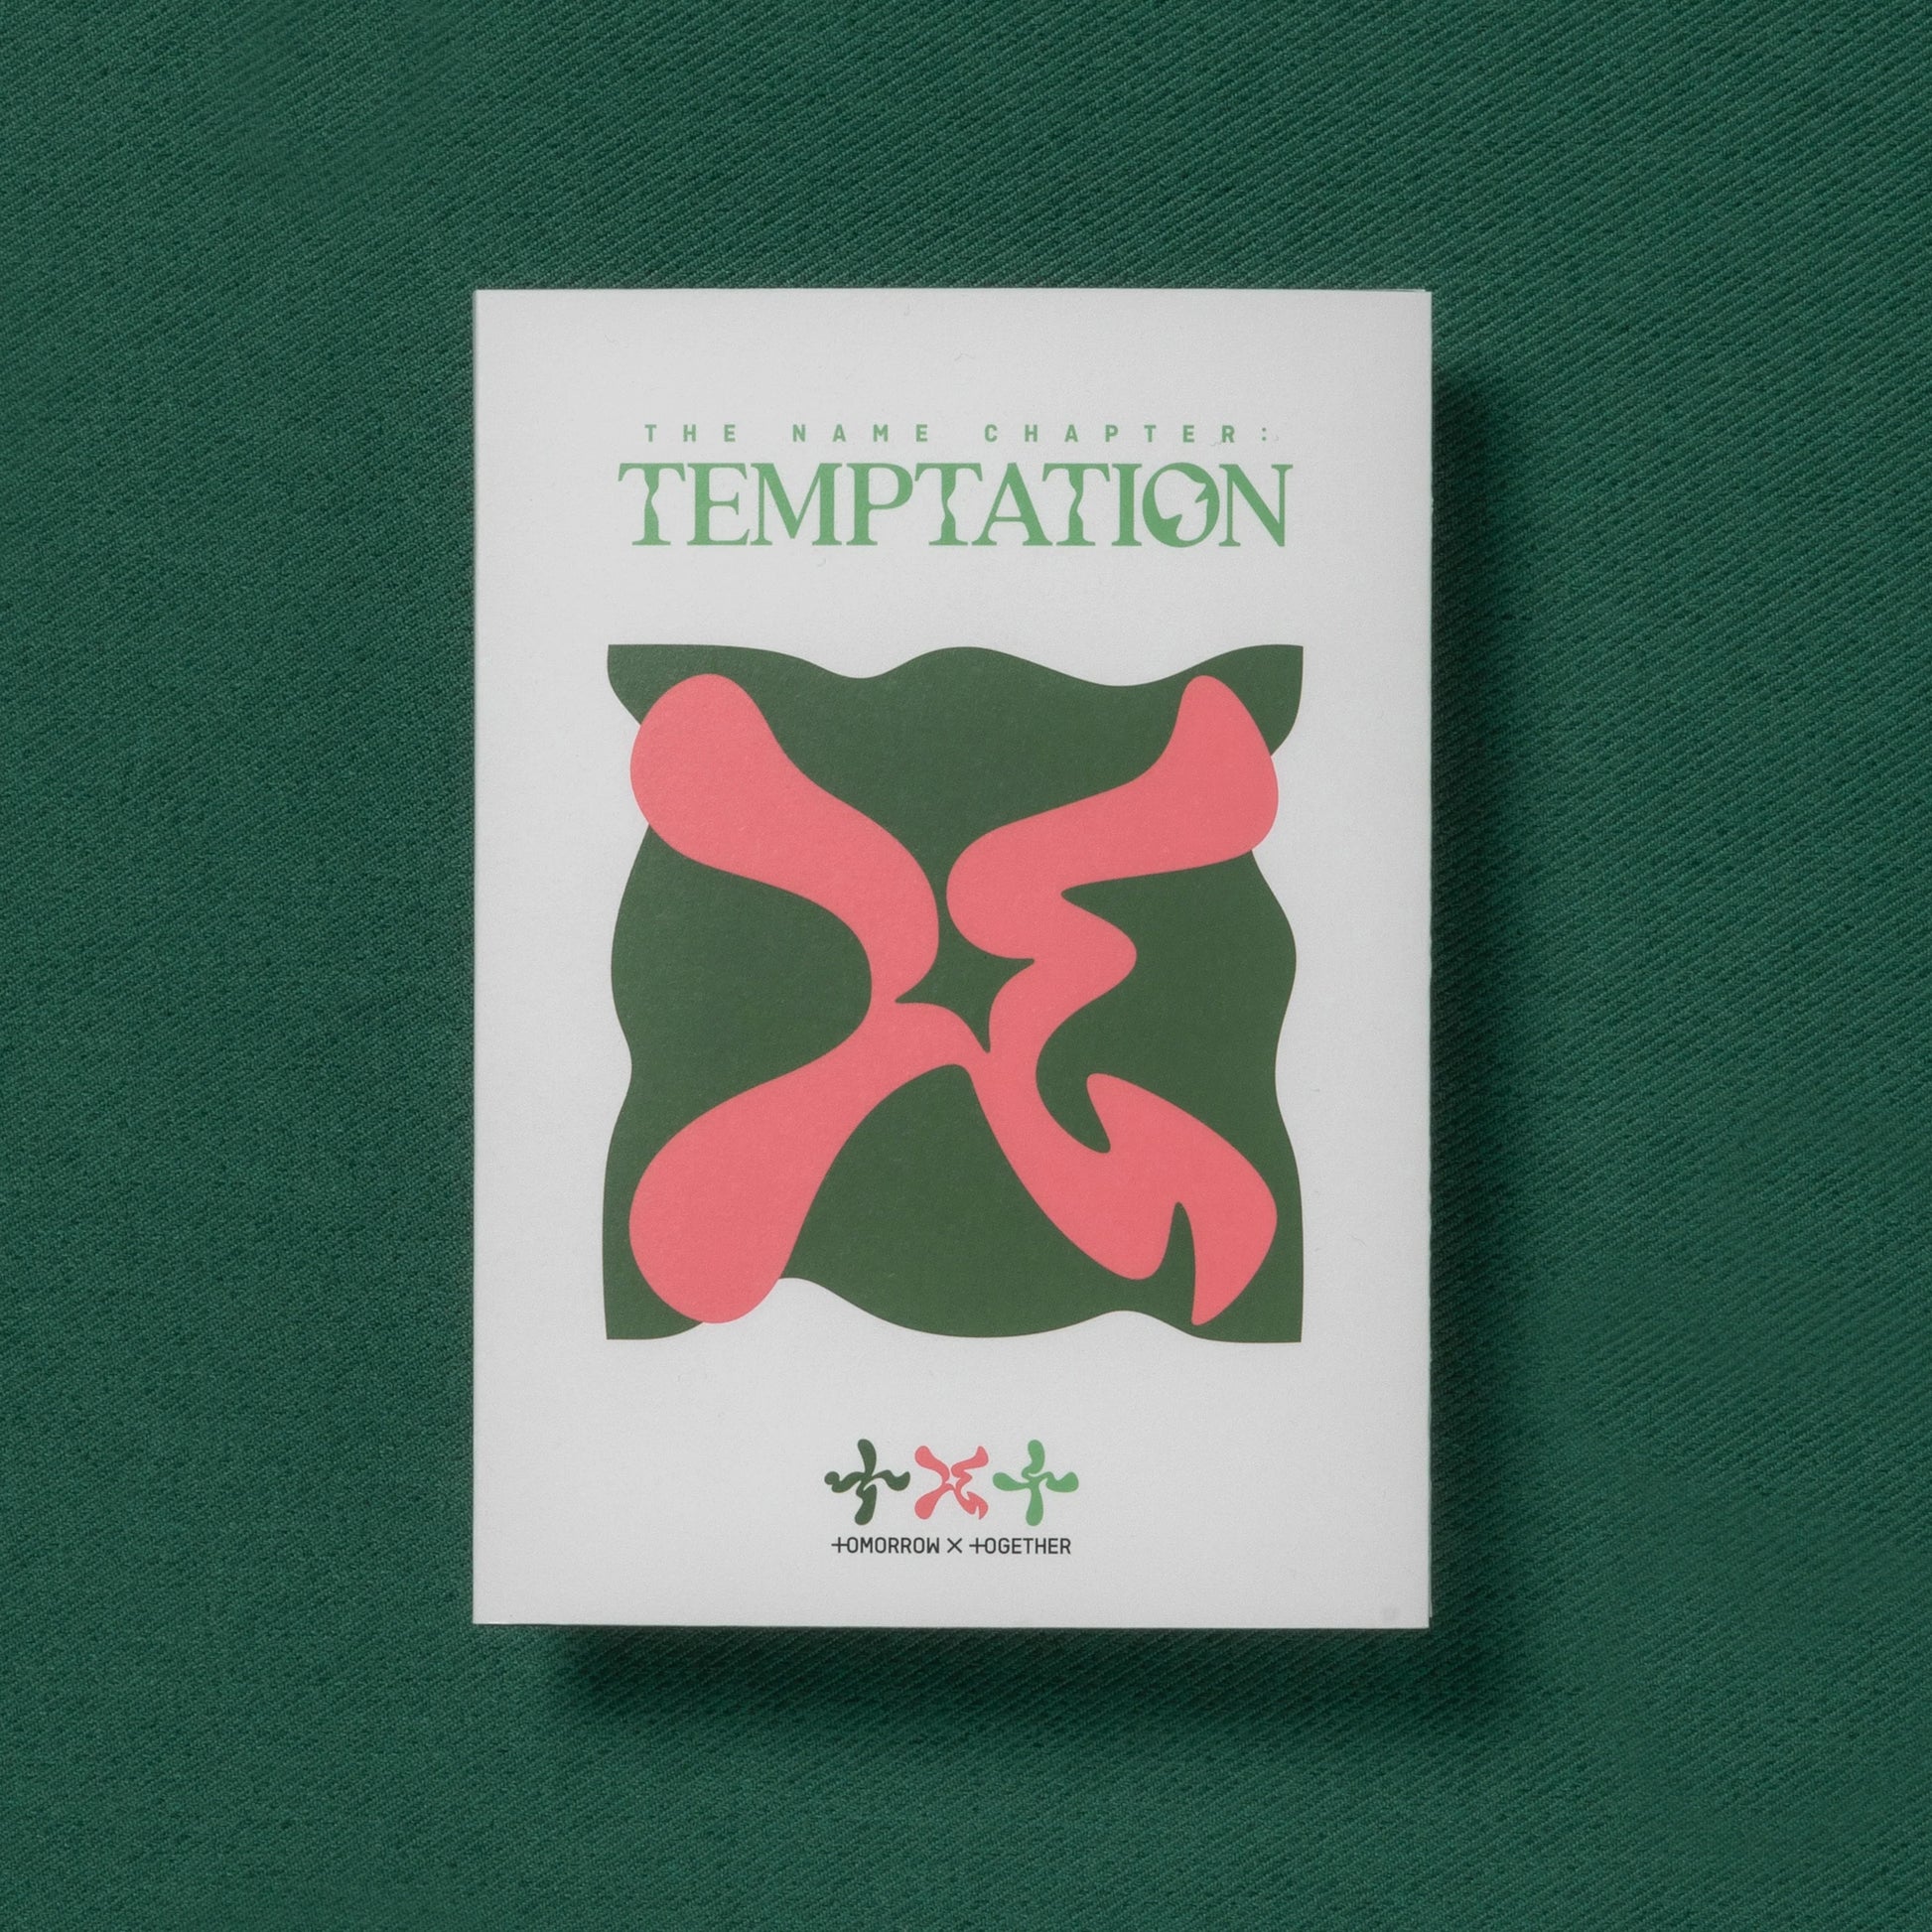 TOMORROW X TOGETHER (TXT) ALBUM 'THE NAME : TEMPTATION' (LULLABY) COVER